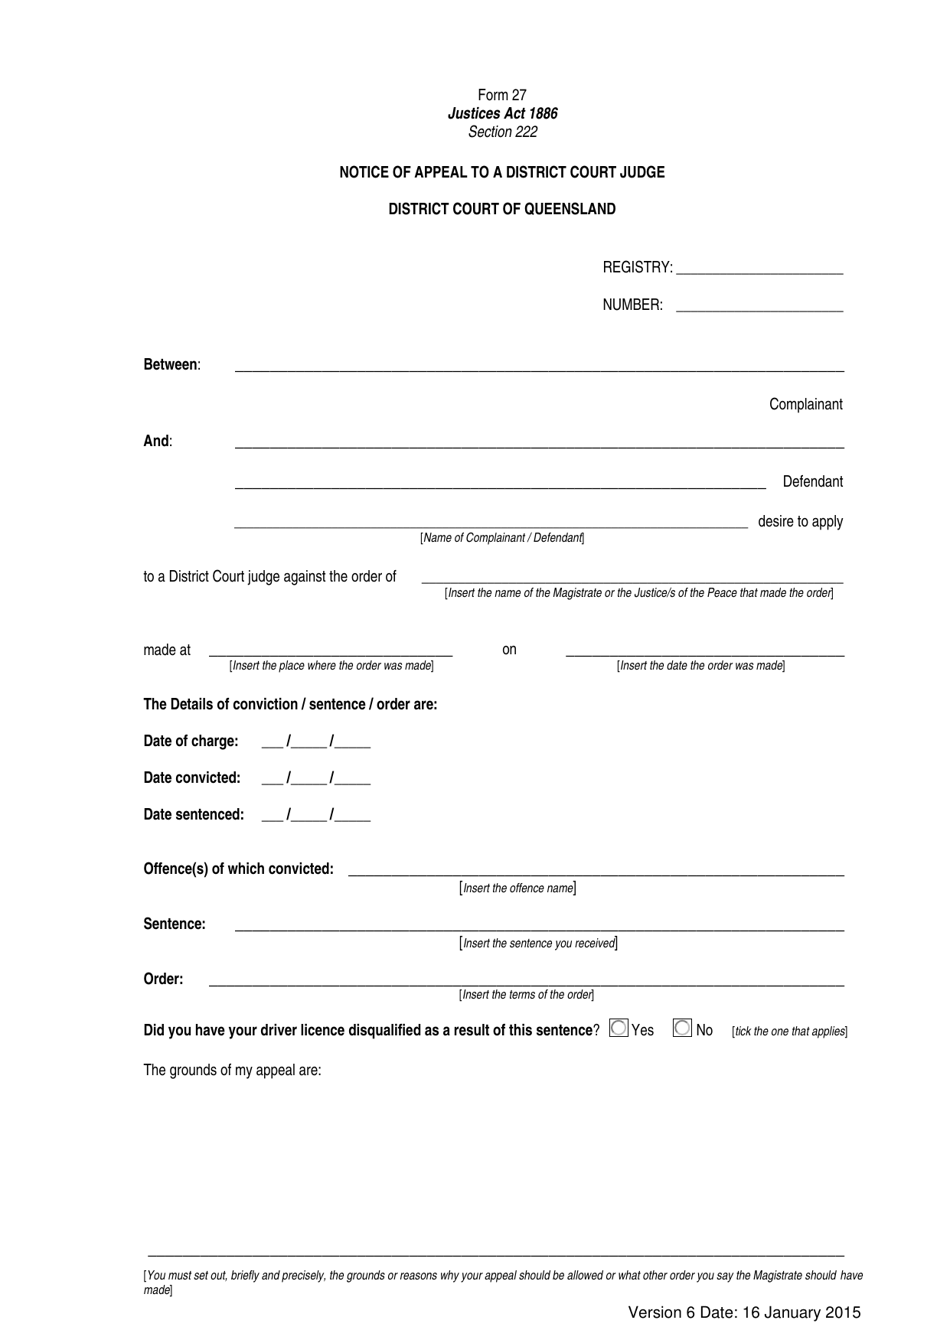 Form 27 Notice of Appeal to a District Court Judge - Queensland, Australia, Page 1